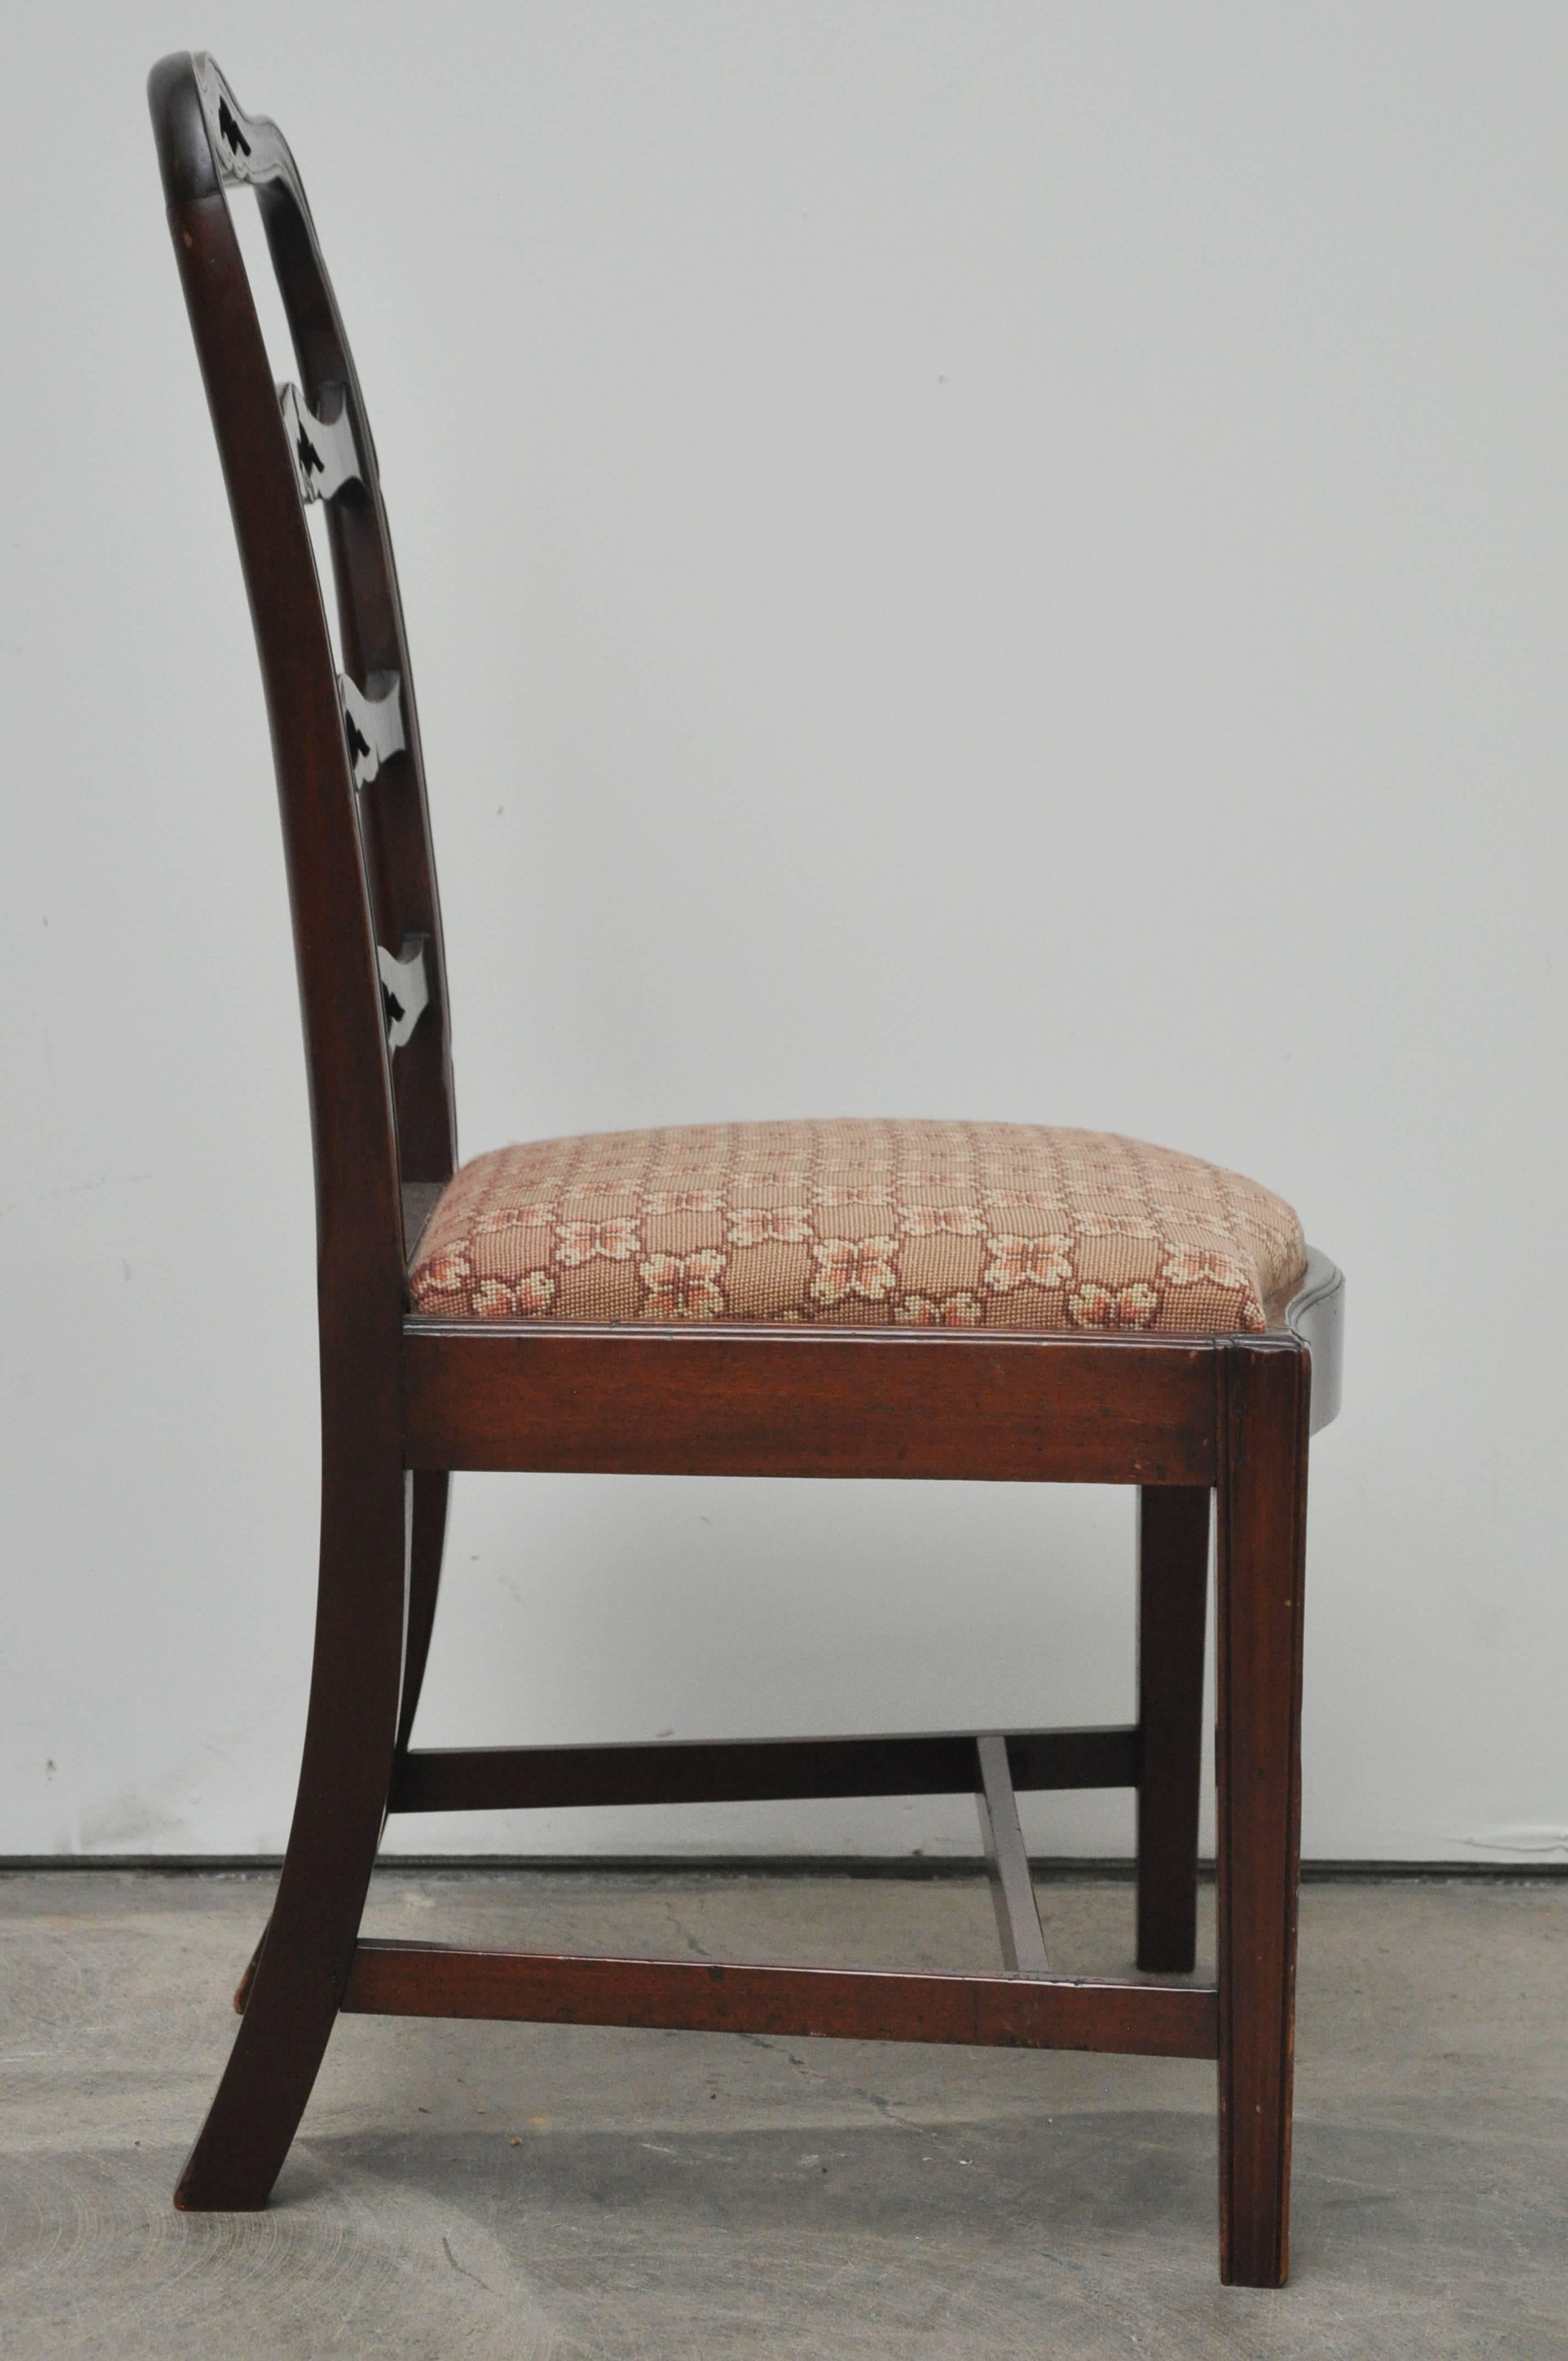 English side chair, circa 1900, needlepoint seat. Seat height 18".